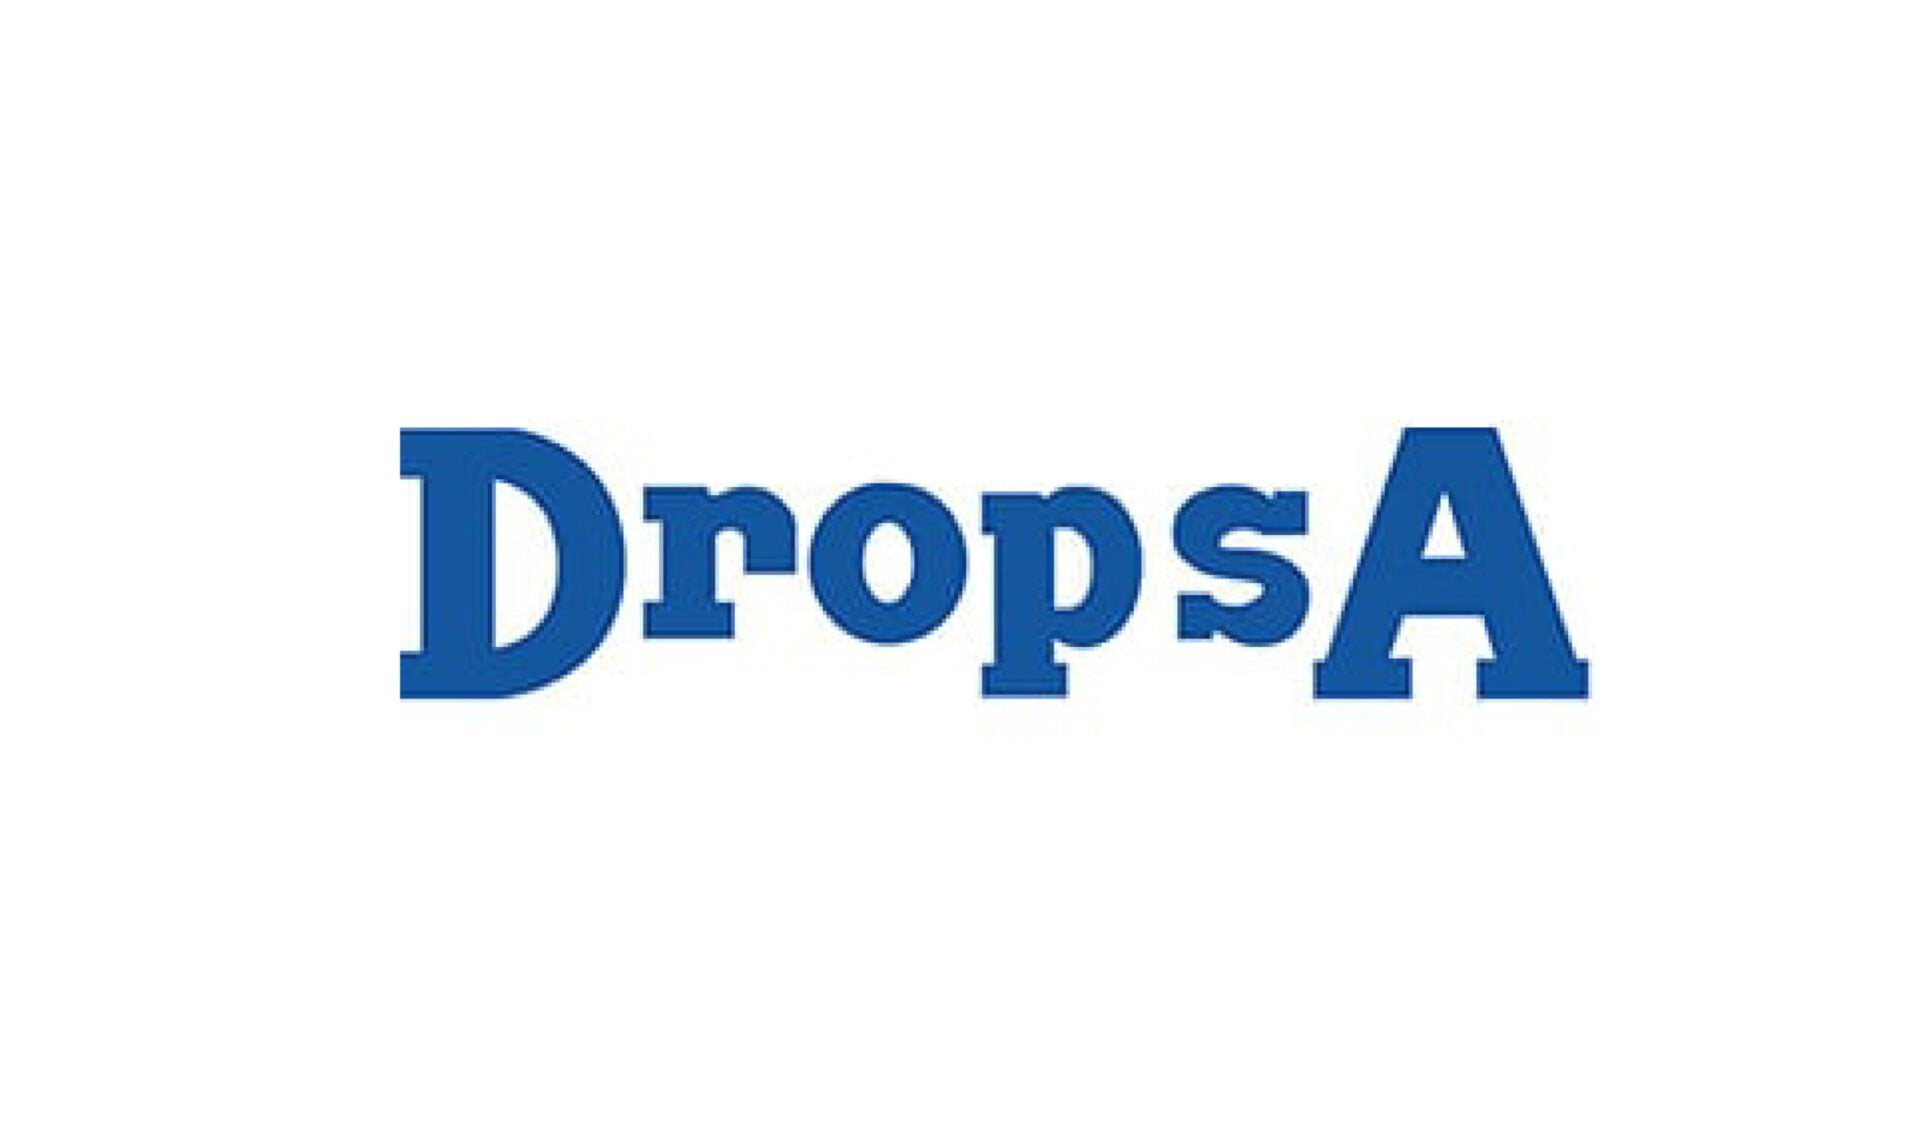 DropsA logo in blue with stylized text